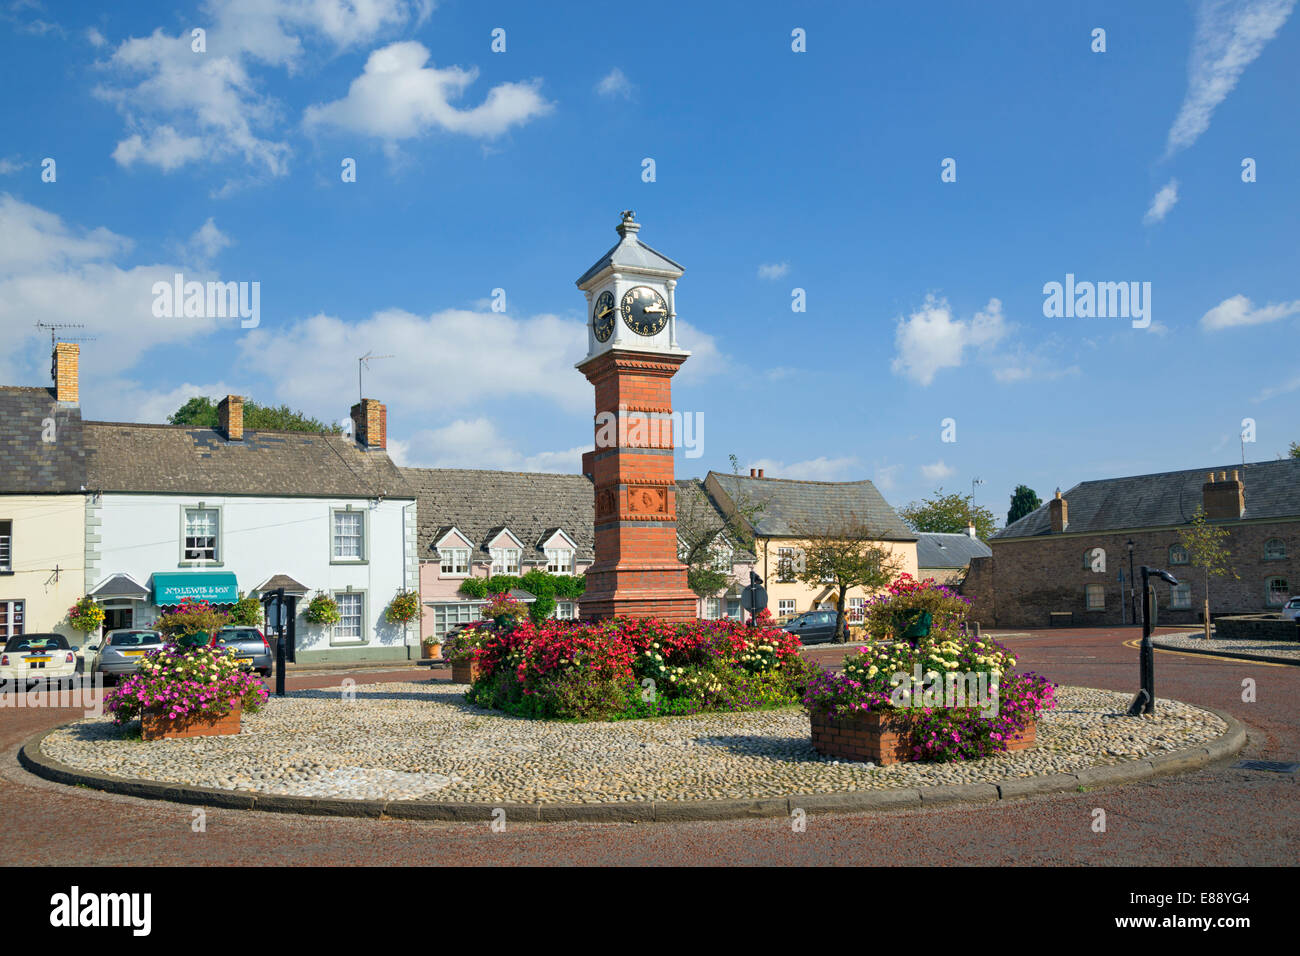 Twyn square, l'Usk, Monmouthshire. Banque D'Images